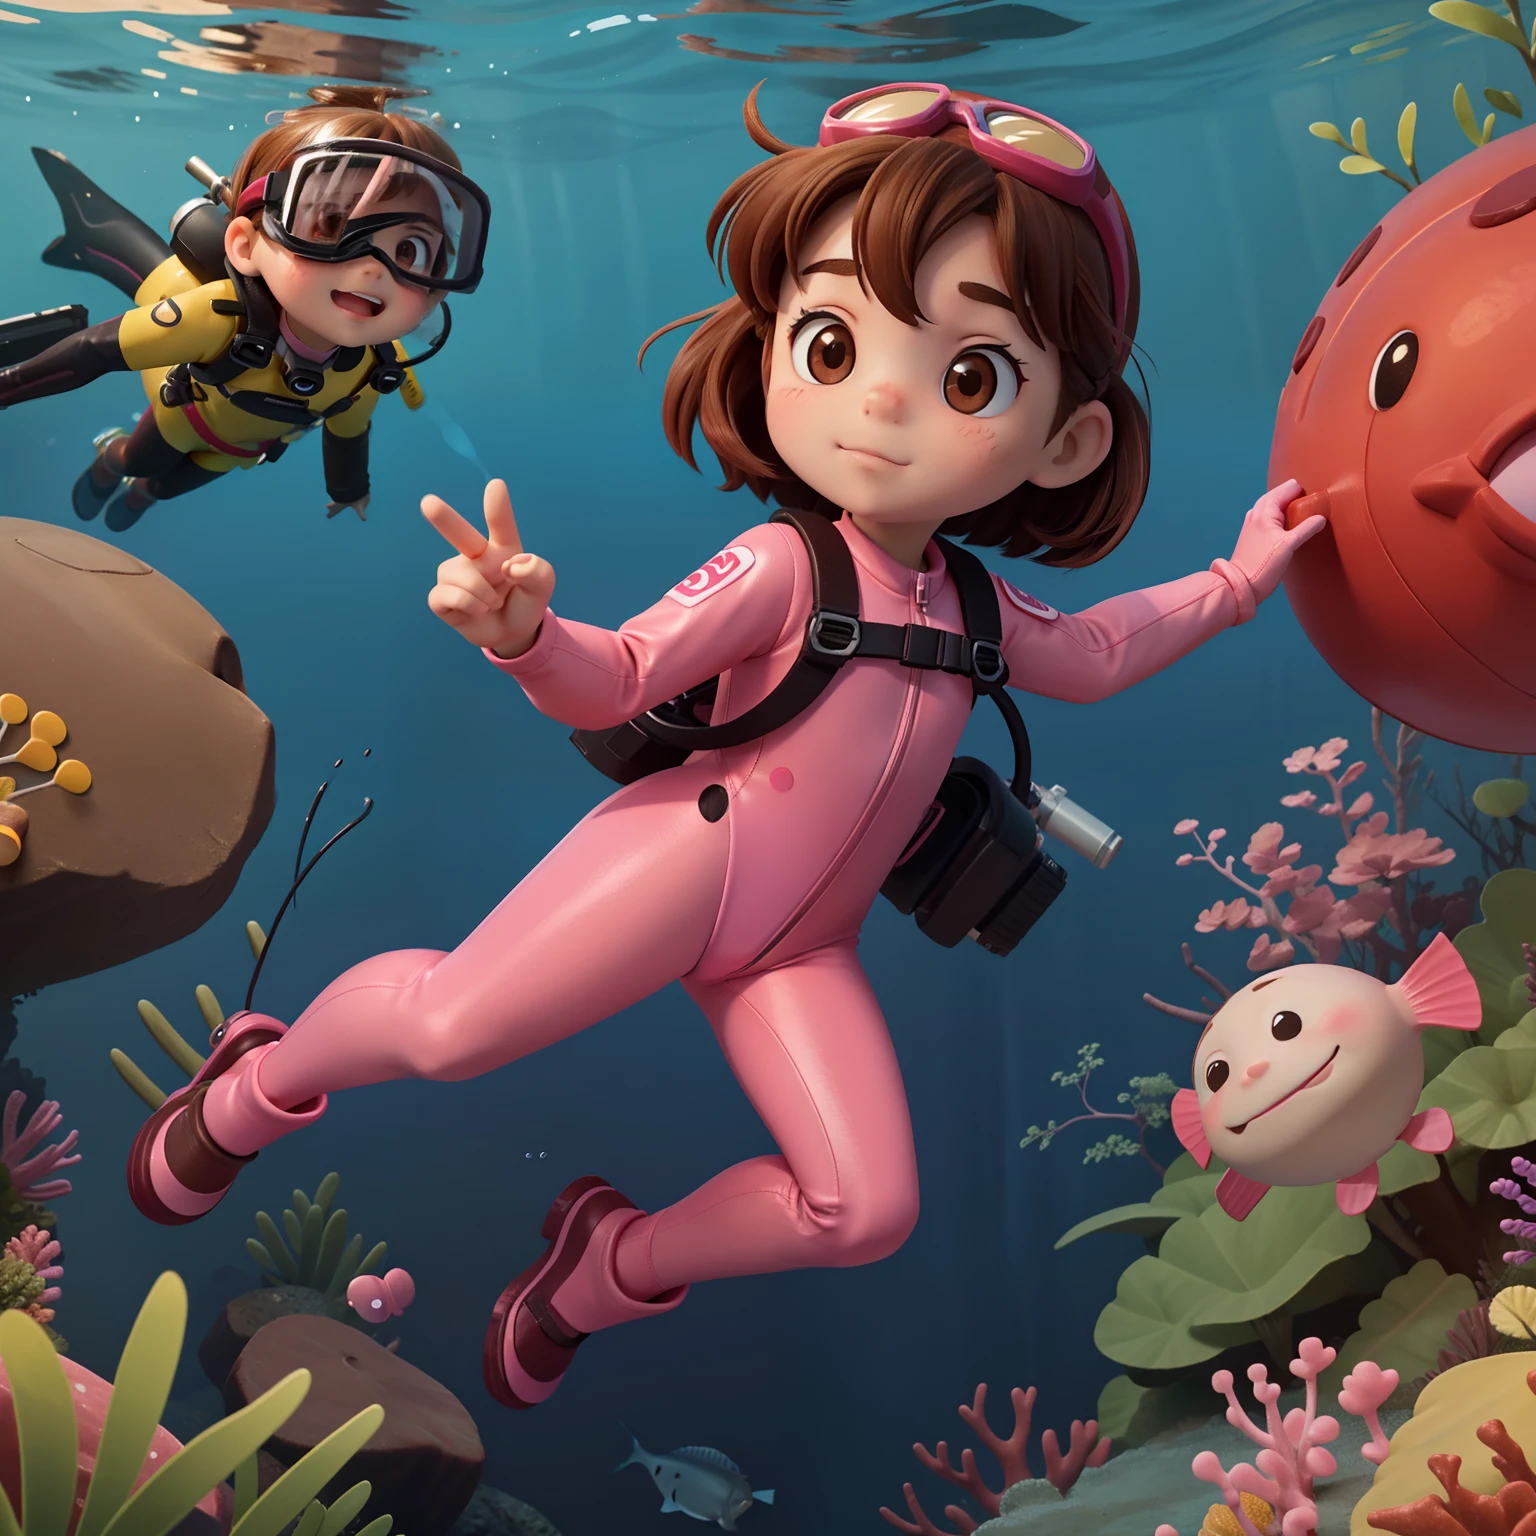 "Frontal image of a 5-year-old girl searching for fishes in the deep sea, with brown hair, brown eyes, rosy cheeks, diving goggles, pink diving suit, diving gloves, diving shoes, in a 2D illustration style of a children's book."